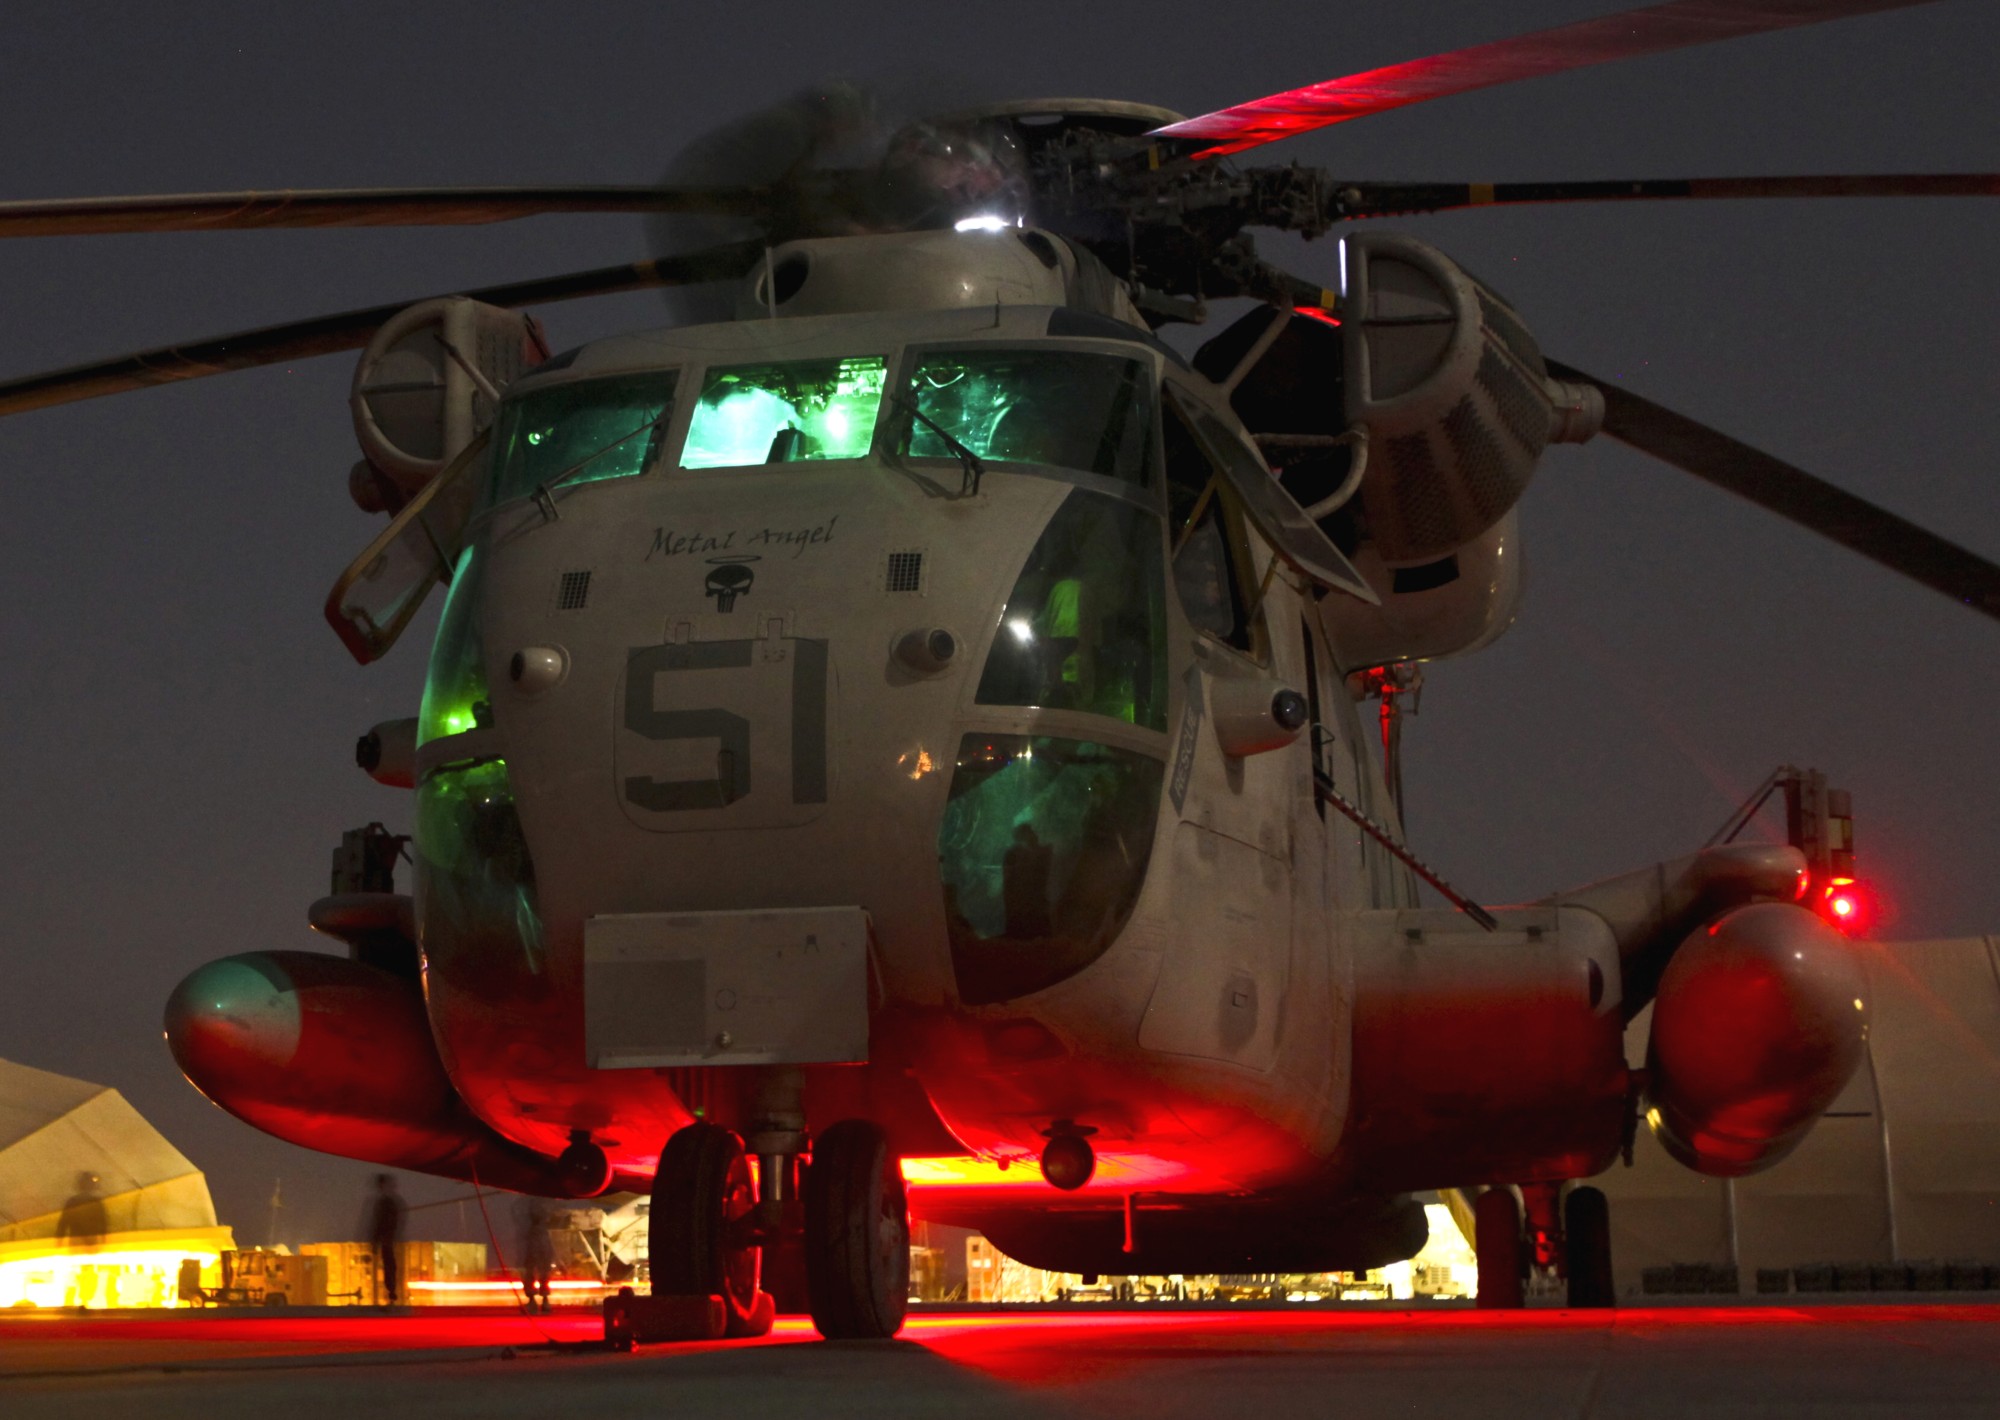 hmh-363 red lions marine heavy helicopter squadron usmc sikorsky ch-53d sea stallion 28 camp bastion afghanistan